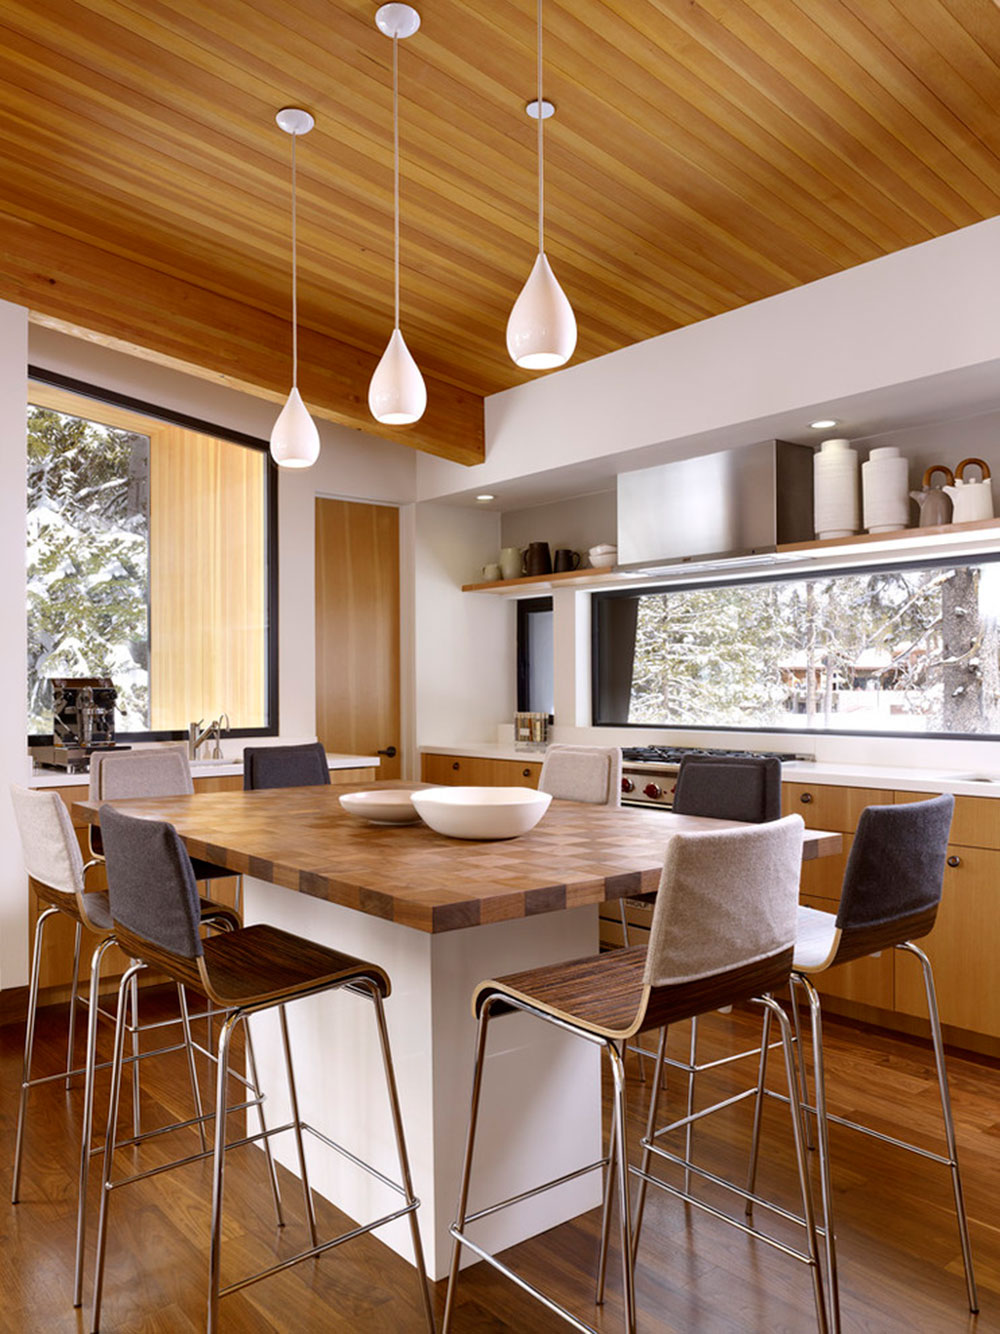 Kitchen bench seating that gathers the whole family 17 kitchen table seating that gathers the whole family